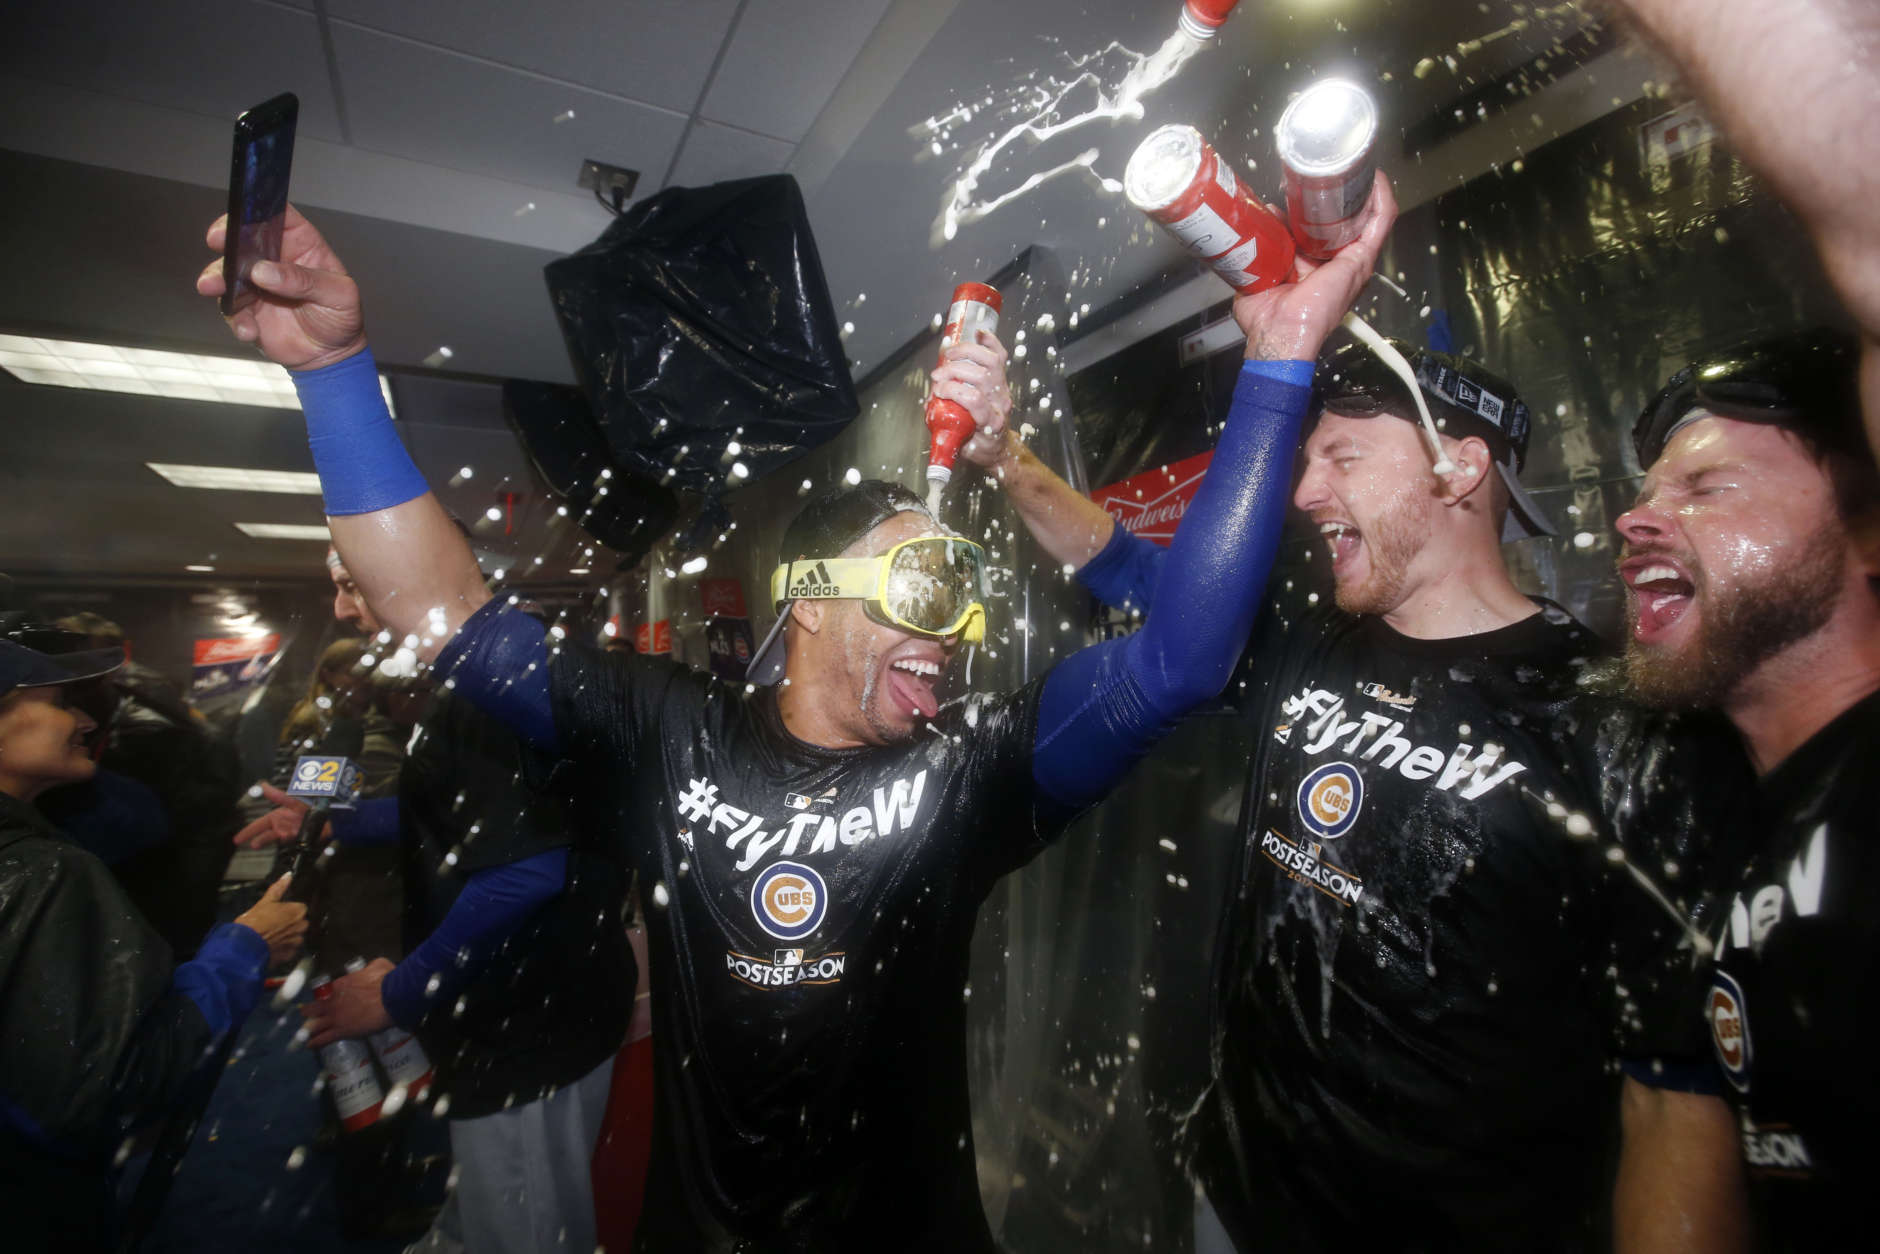 Members of the Chicago Cubs celebrate after Game 5 of baseball's National League Division Series against the Washington Nationals, at Nationals Park, early Friday, Oct. 13, 2017, in Washington. The Cubs won 9-8. (AP Photo/Alex Brandon)